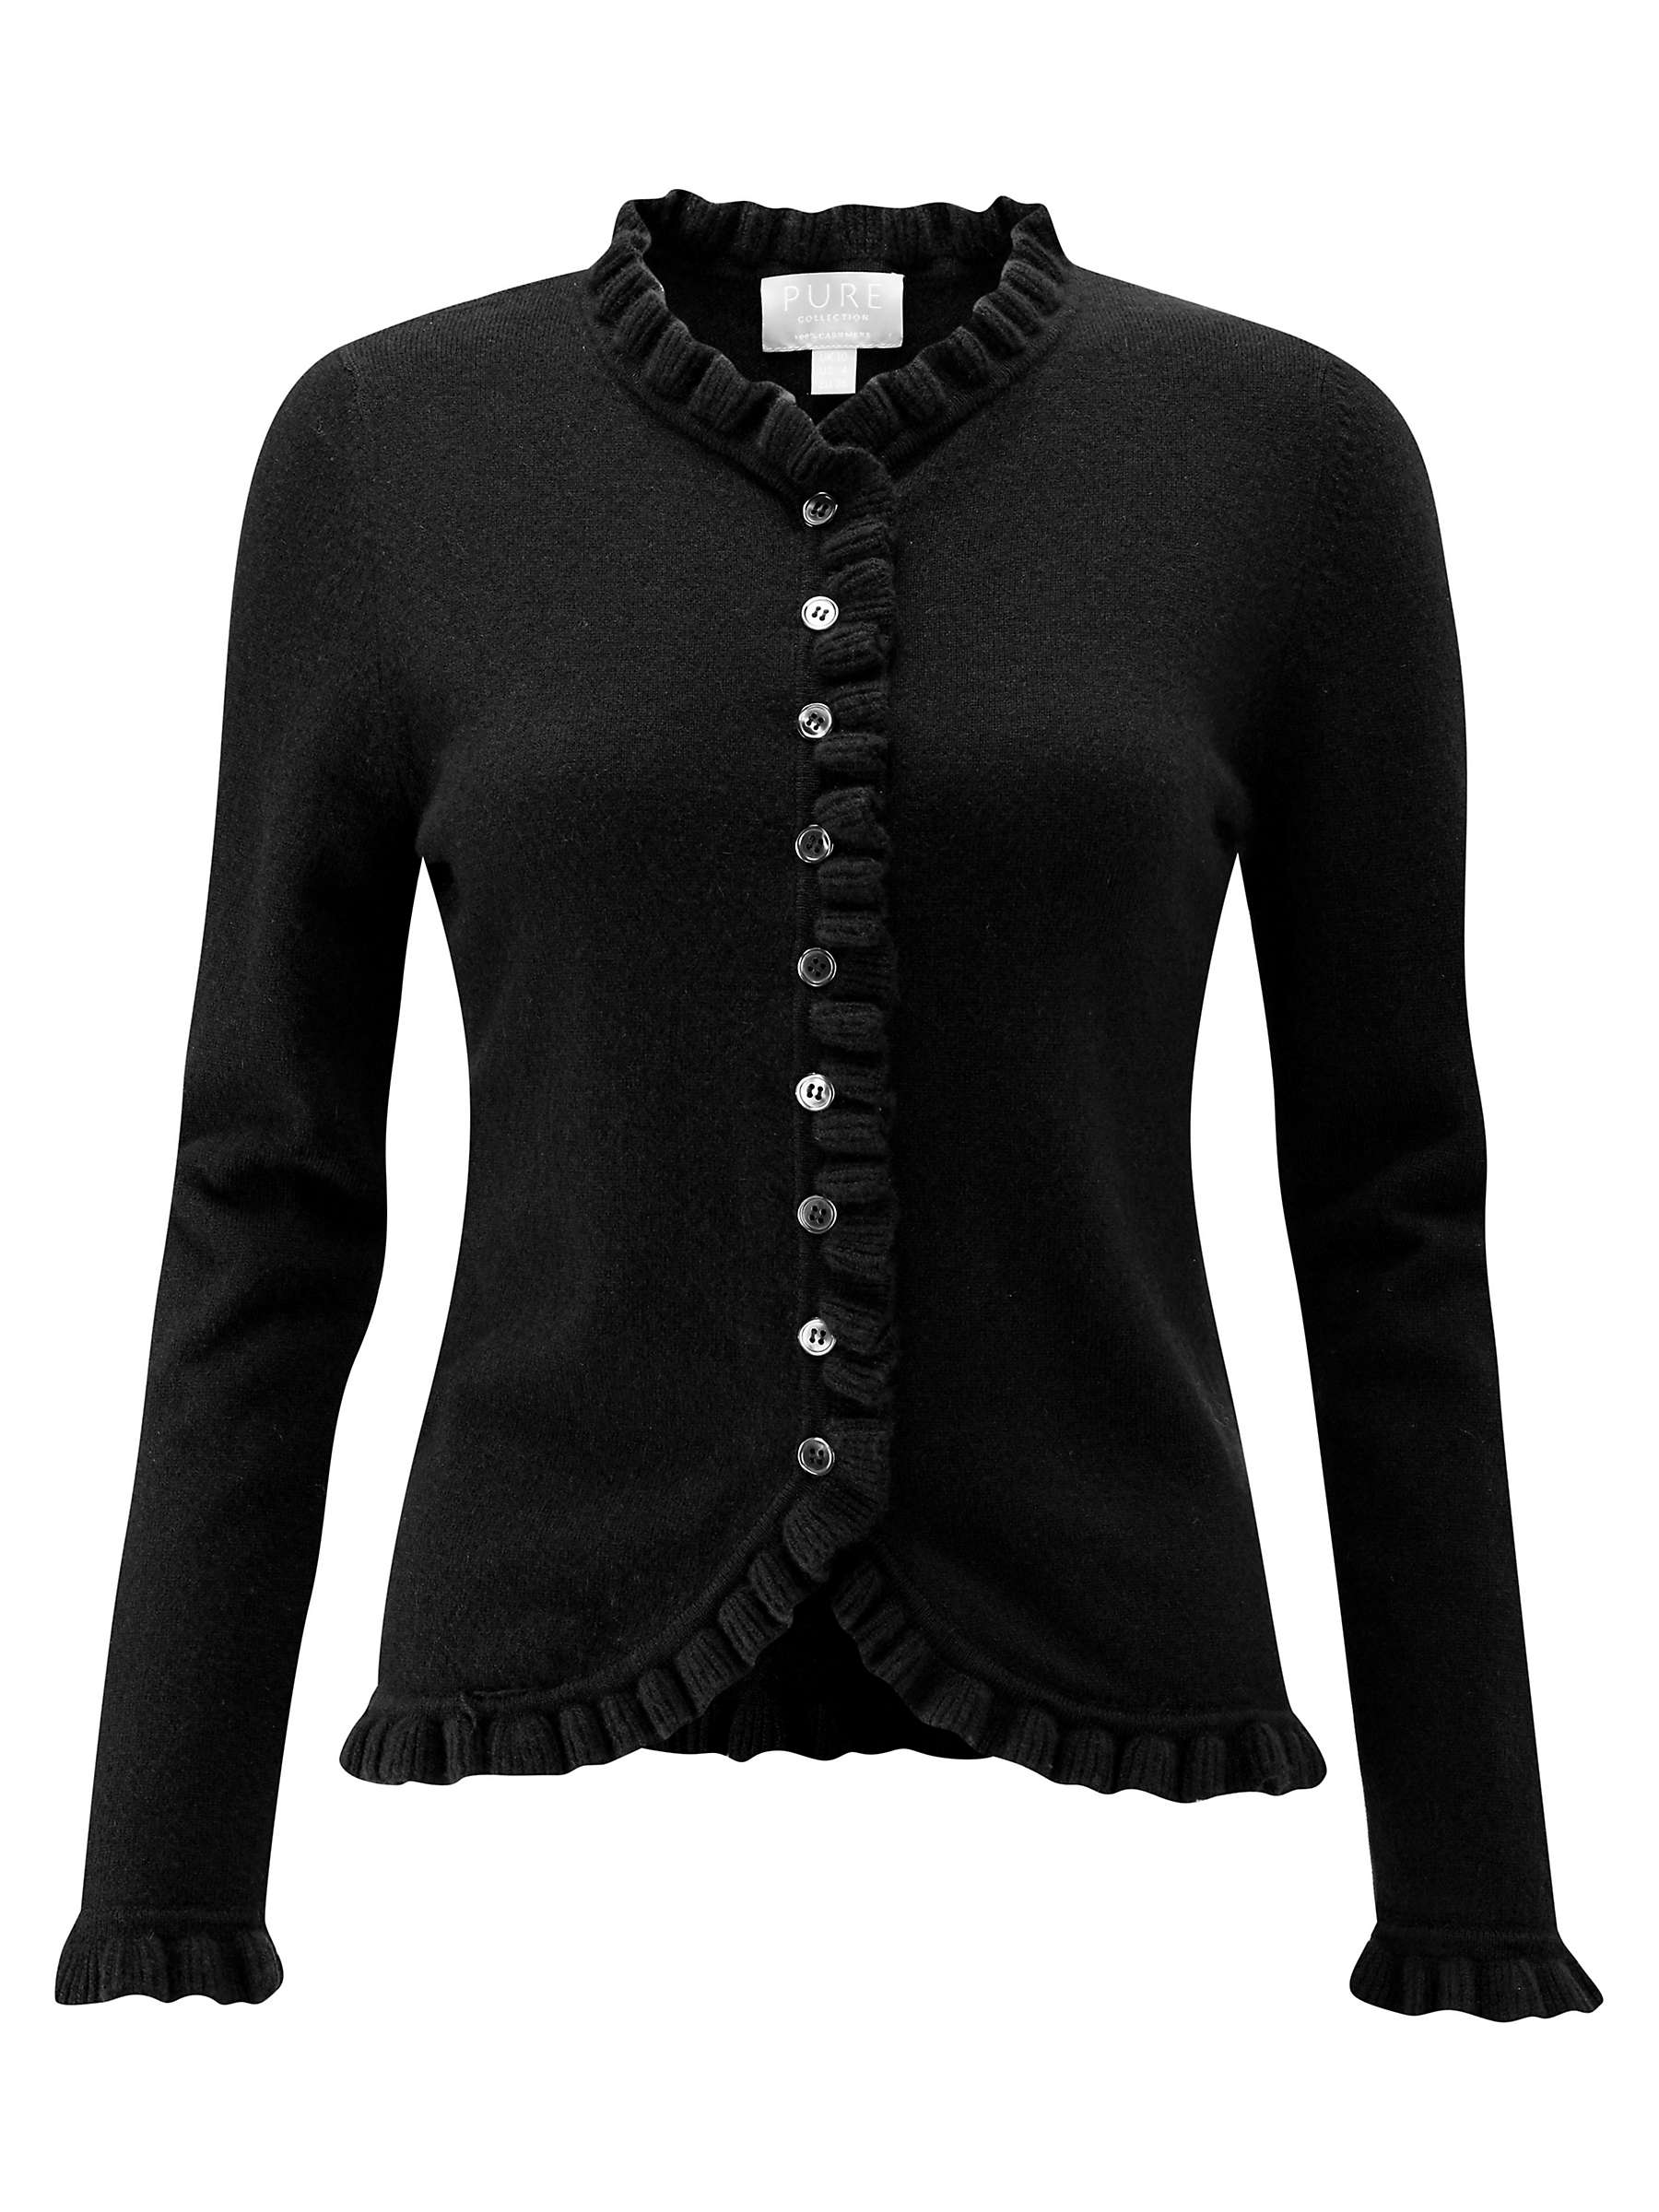 Buy Pure Collection Cashmere Ruffle Edge Cardigan, Black Online at johnlewis.com